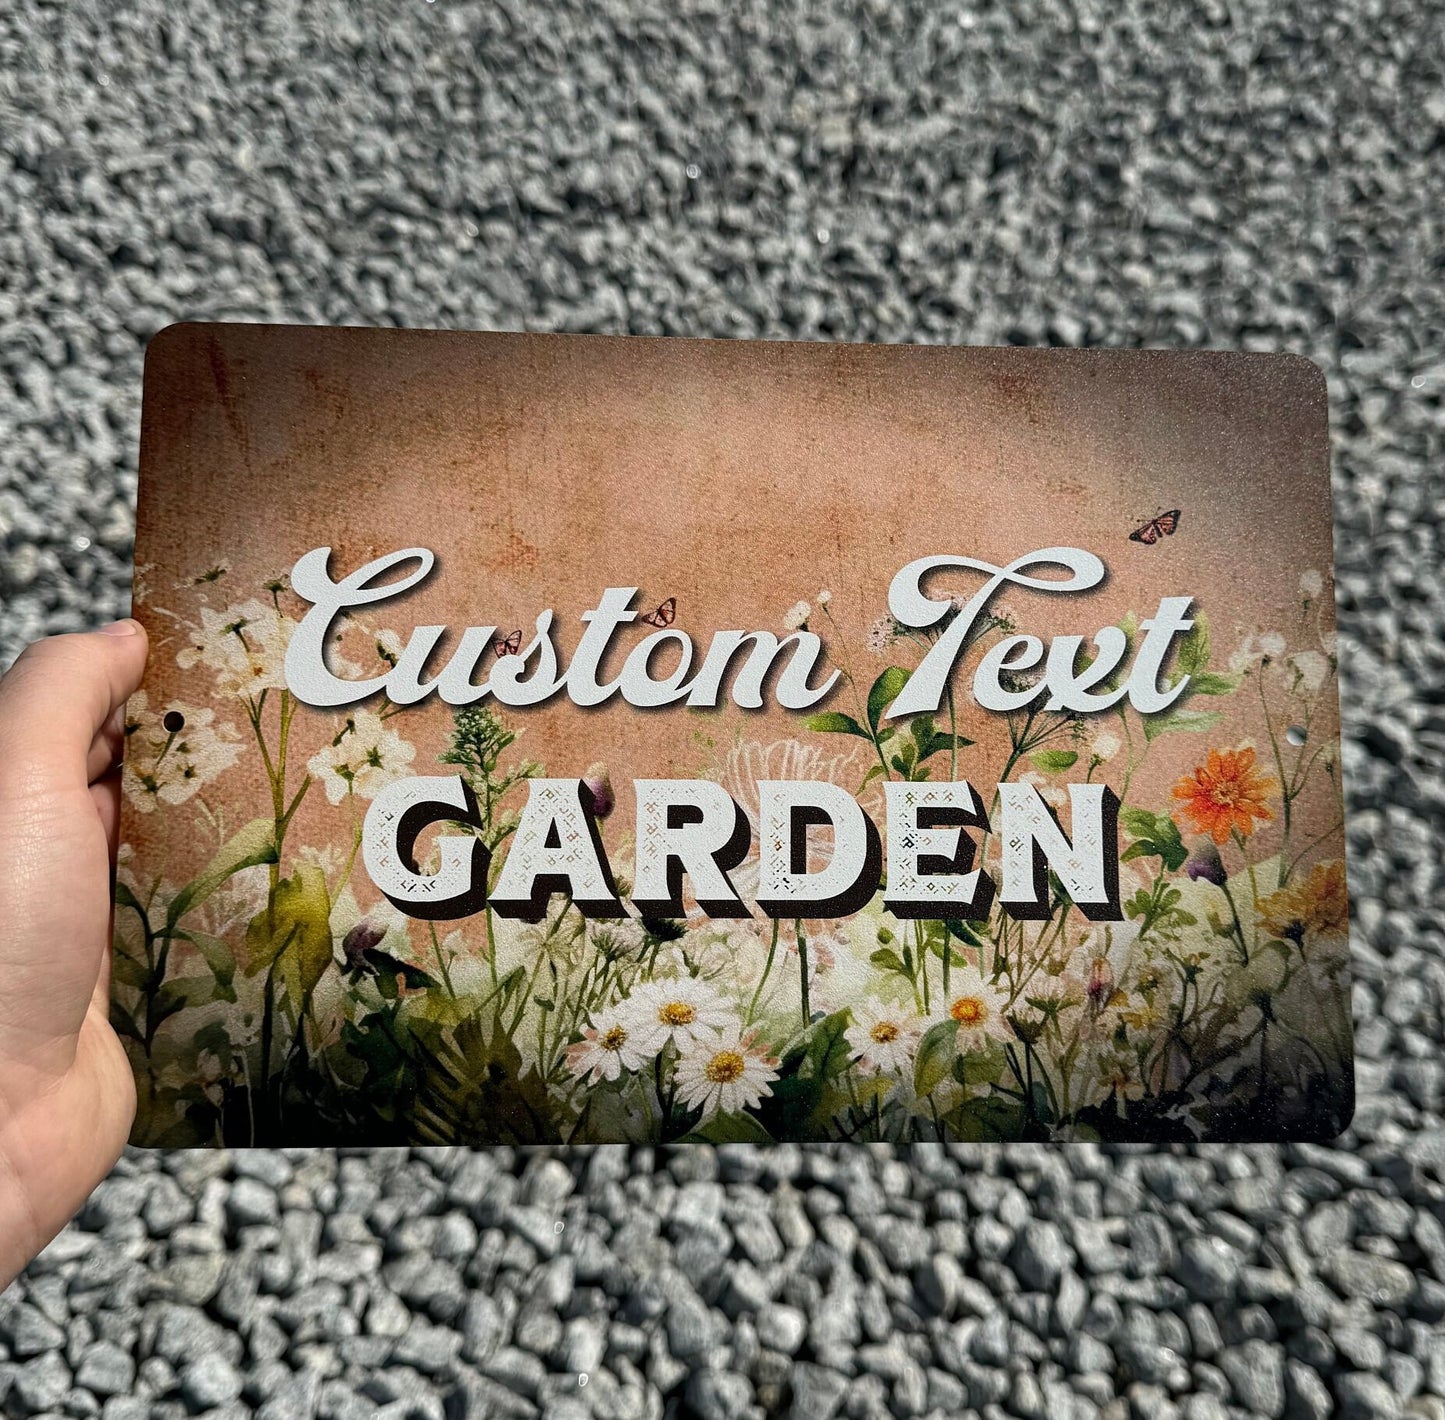 Custom Printed Garden Sign, Personalized Metal Sign